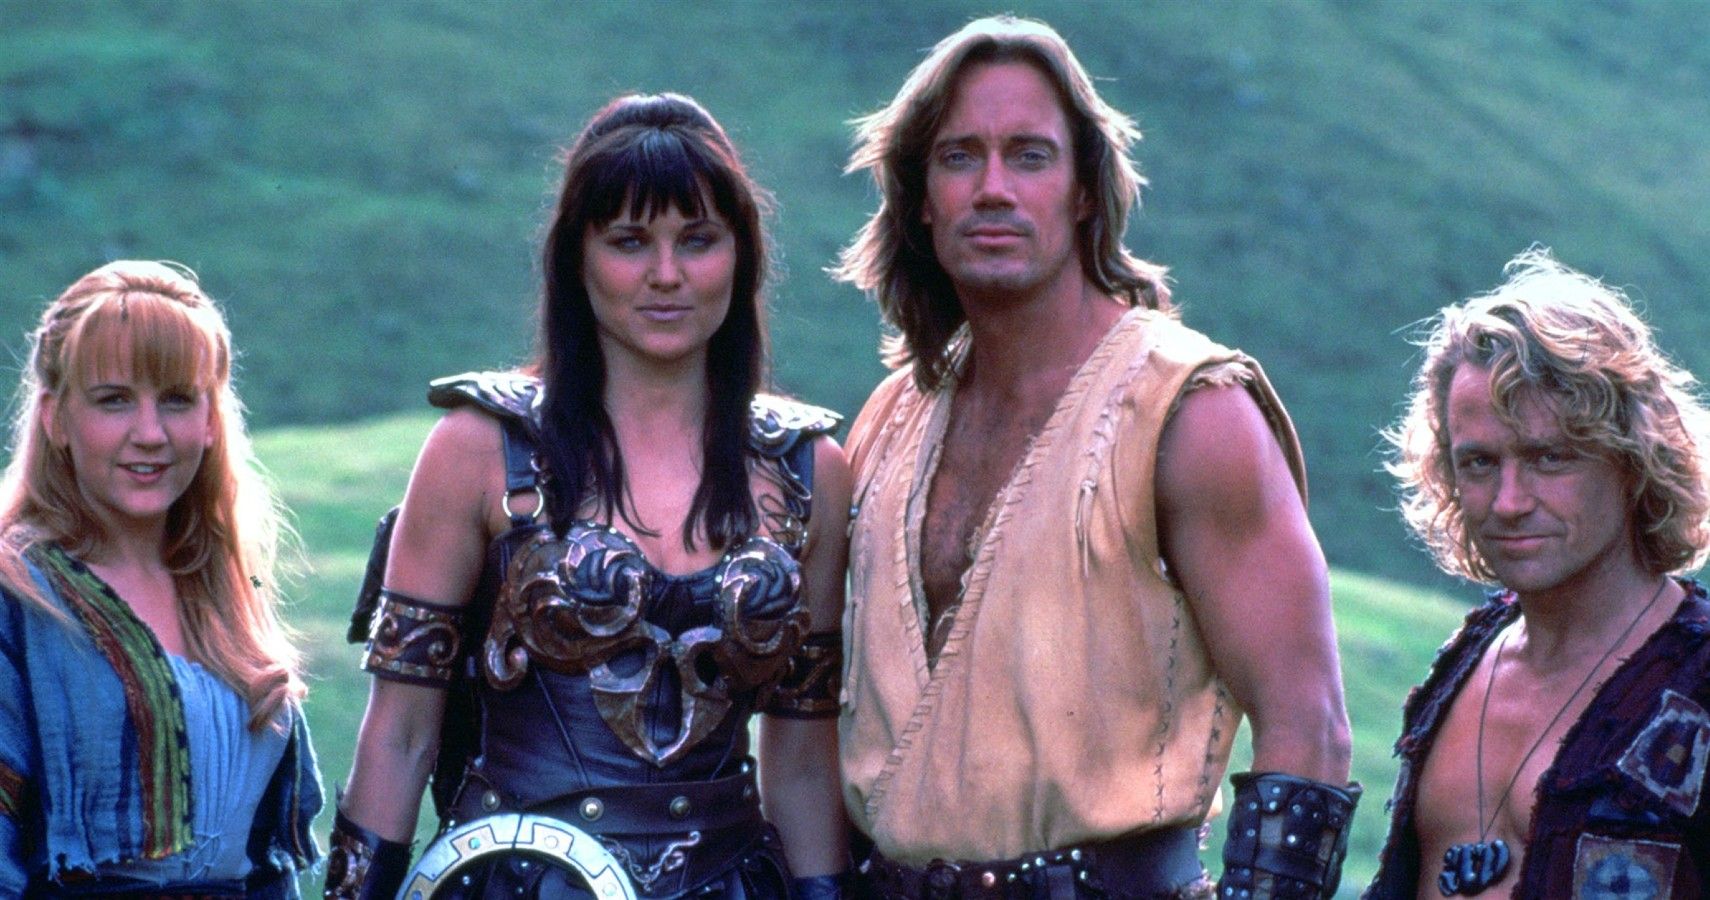 Xena Warrior Princess 10 Facts To Remember About Her On Her 25th Anniversary